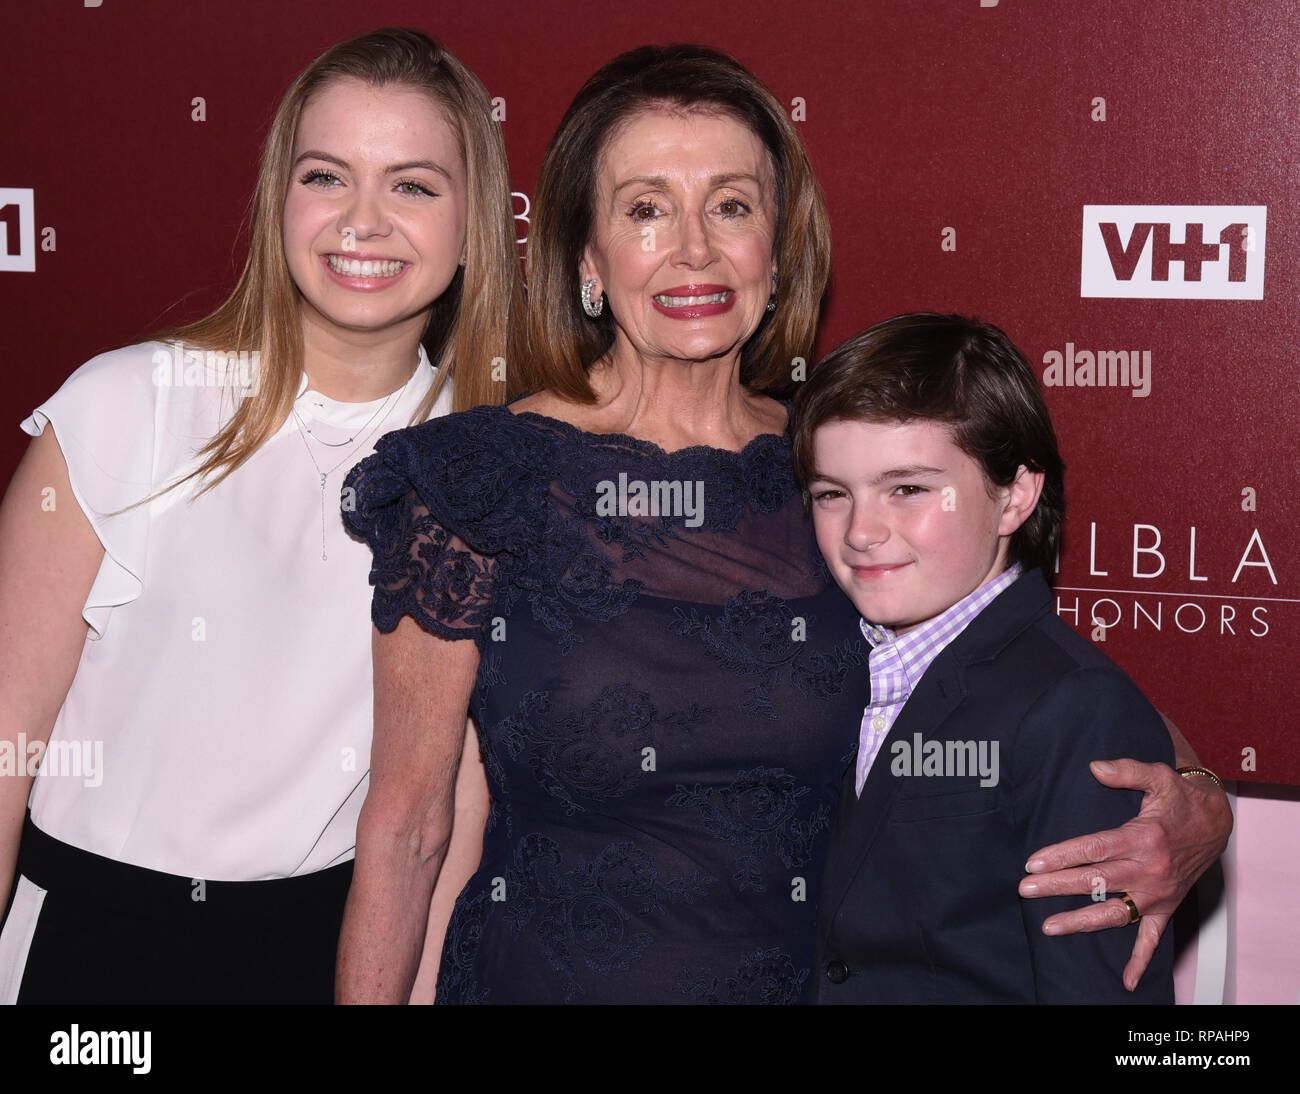 Los Angeles, California, USA. 20th Feb, 2019. 20 February 2019 - Los Angeles, California - Speaker Nancy Pelosi, Thomas Voss and Madeleine Prowda. VH1 Trailblazer Honors celebrate female empowerment held at Wilshire Ebell Theatre. Photo Credit: Billy Bennight/AdMedia Credit: Billy Bennight/AdMedia/ZUMA Wire/Alamy Live News Stock Photo